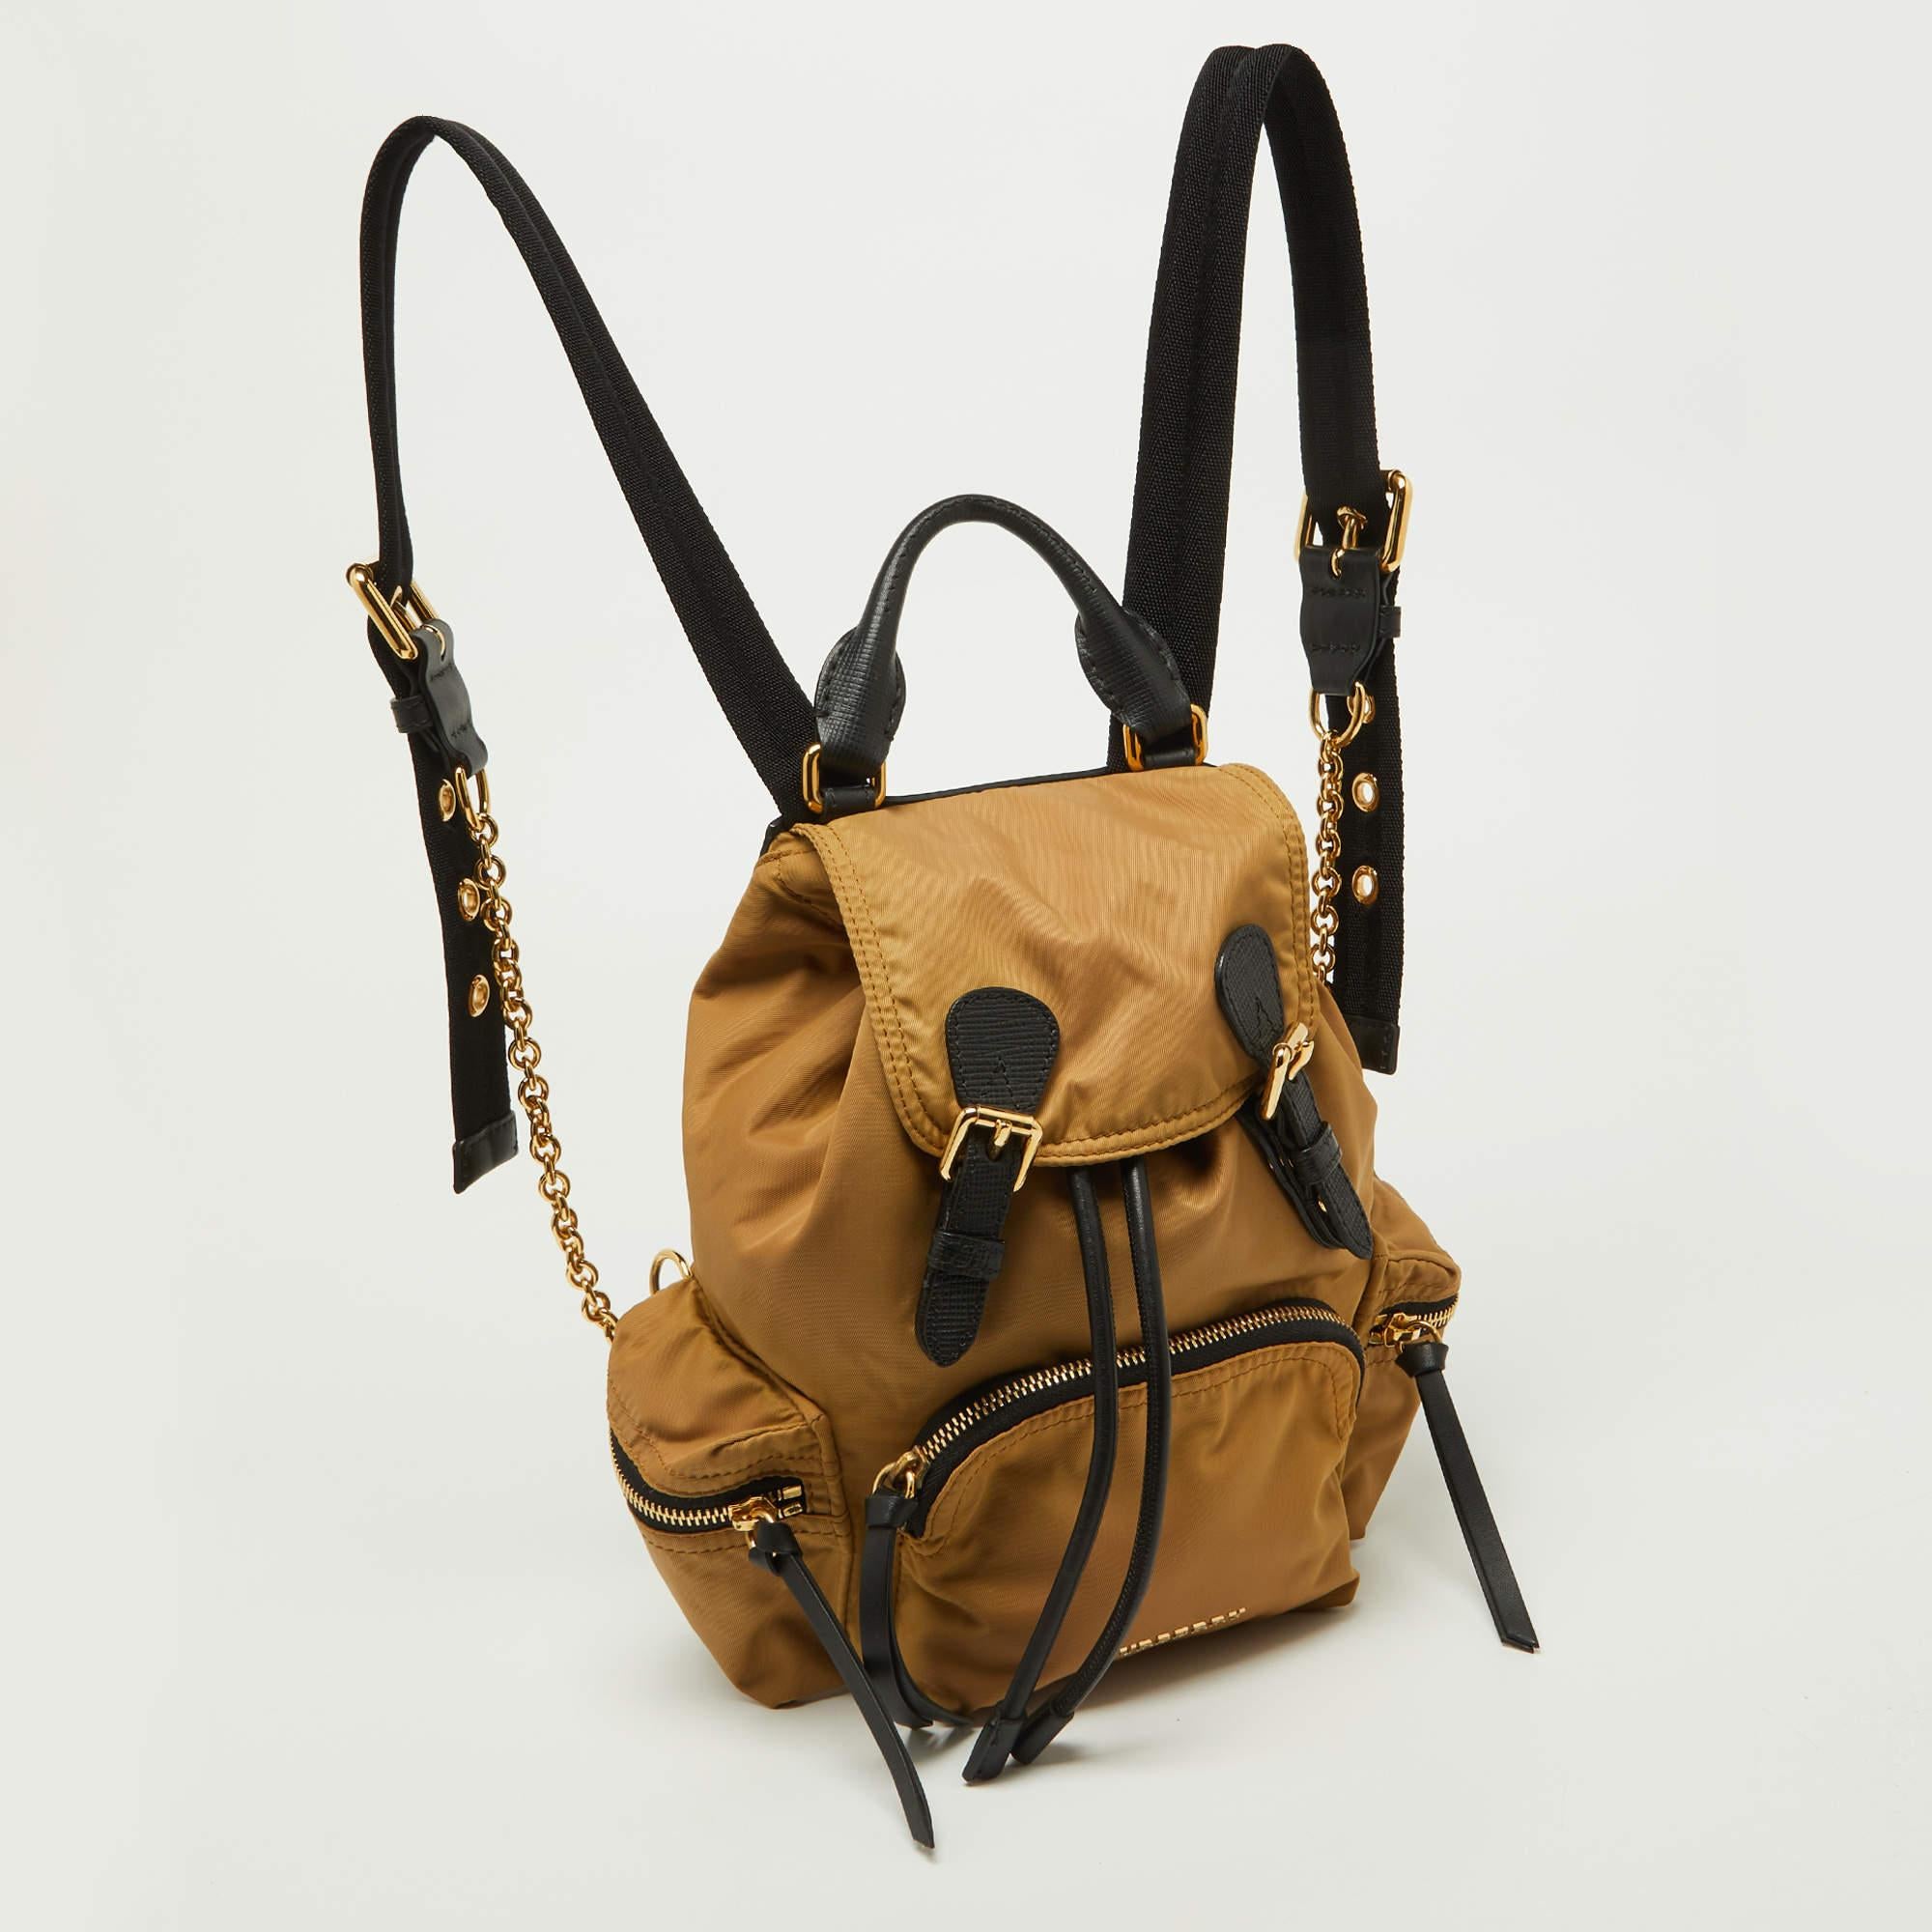 Women's Burberry Beige/Black Nylon and Leather Small Rucksack Backpack